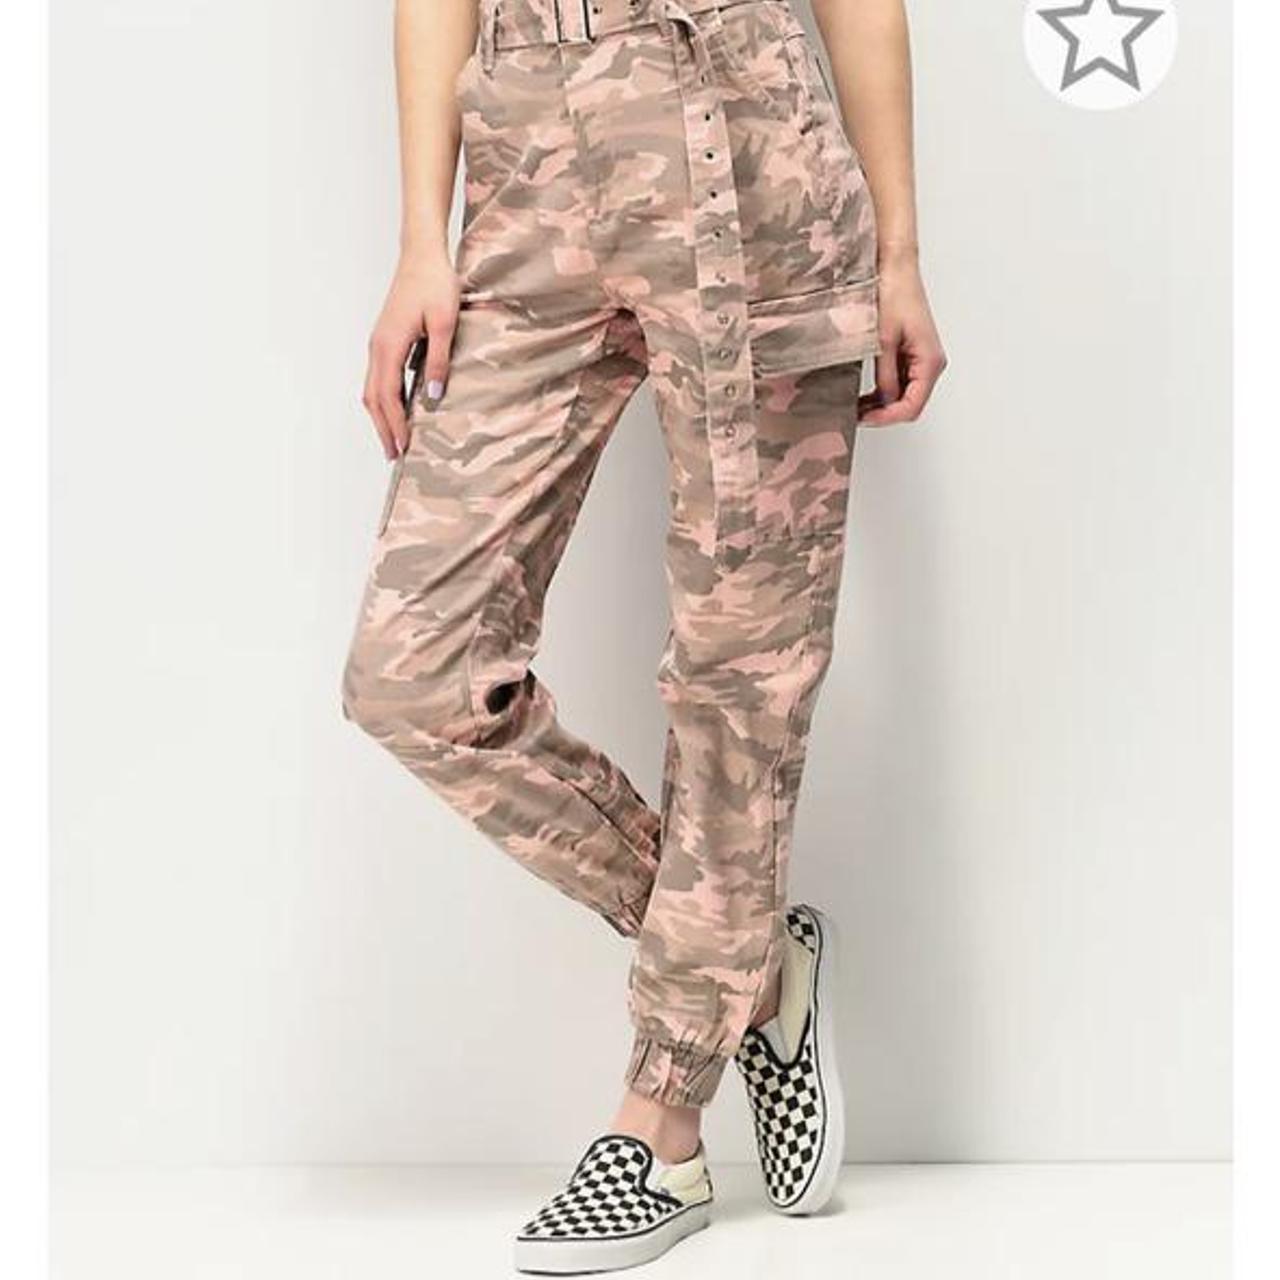 HEYounGIRL Pink Camouflage Pants Womens Camo Cargo Sweat Pants High Waist  Elastic Trousers Casual Baggy Joggers Print Pockets LJ200820 From Luo00,  $17.11 | DHgate.Com